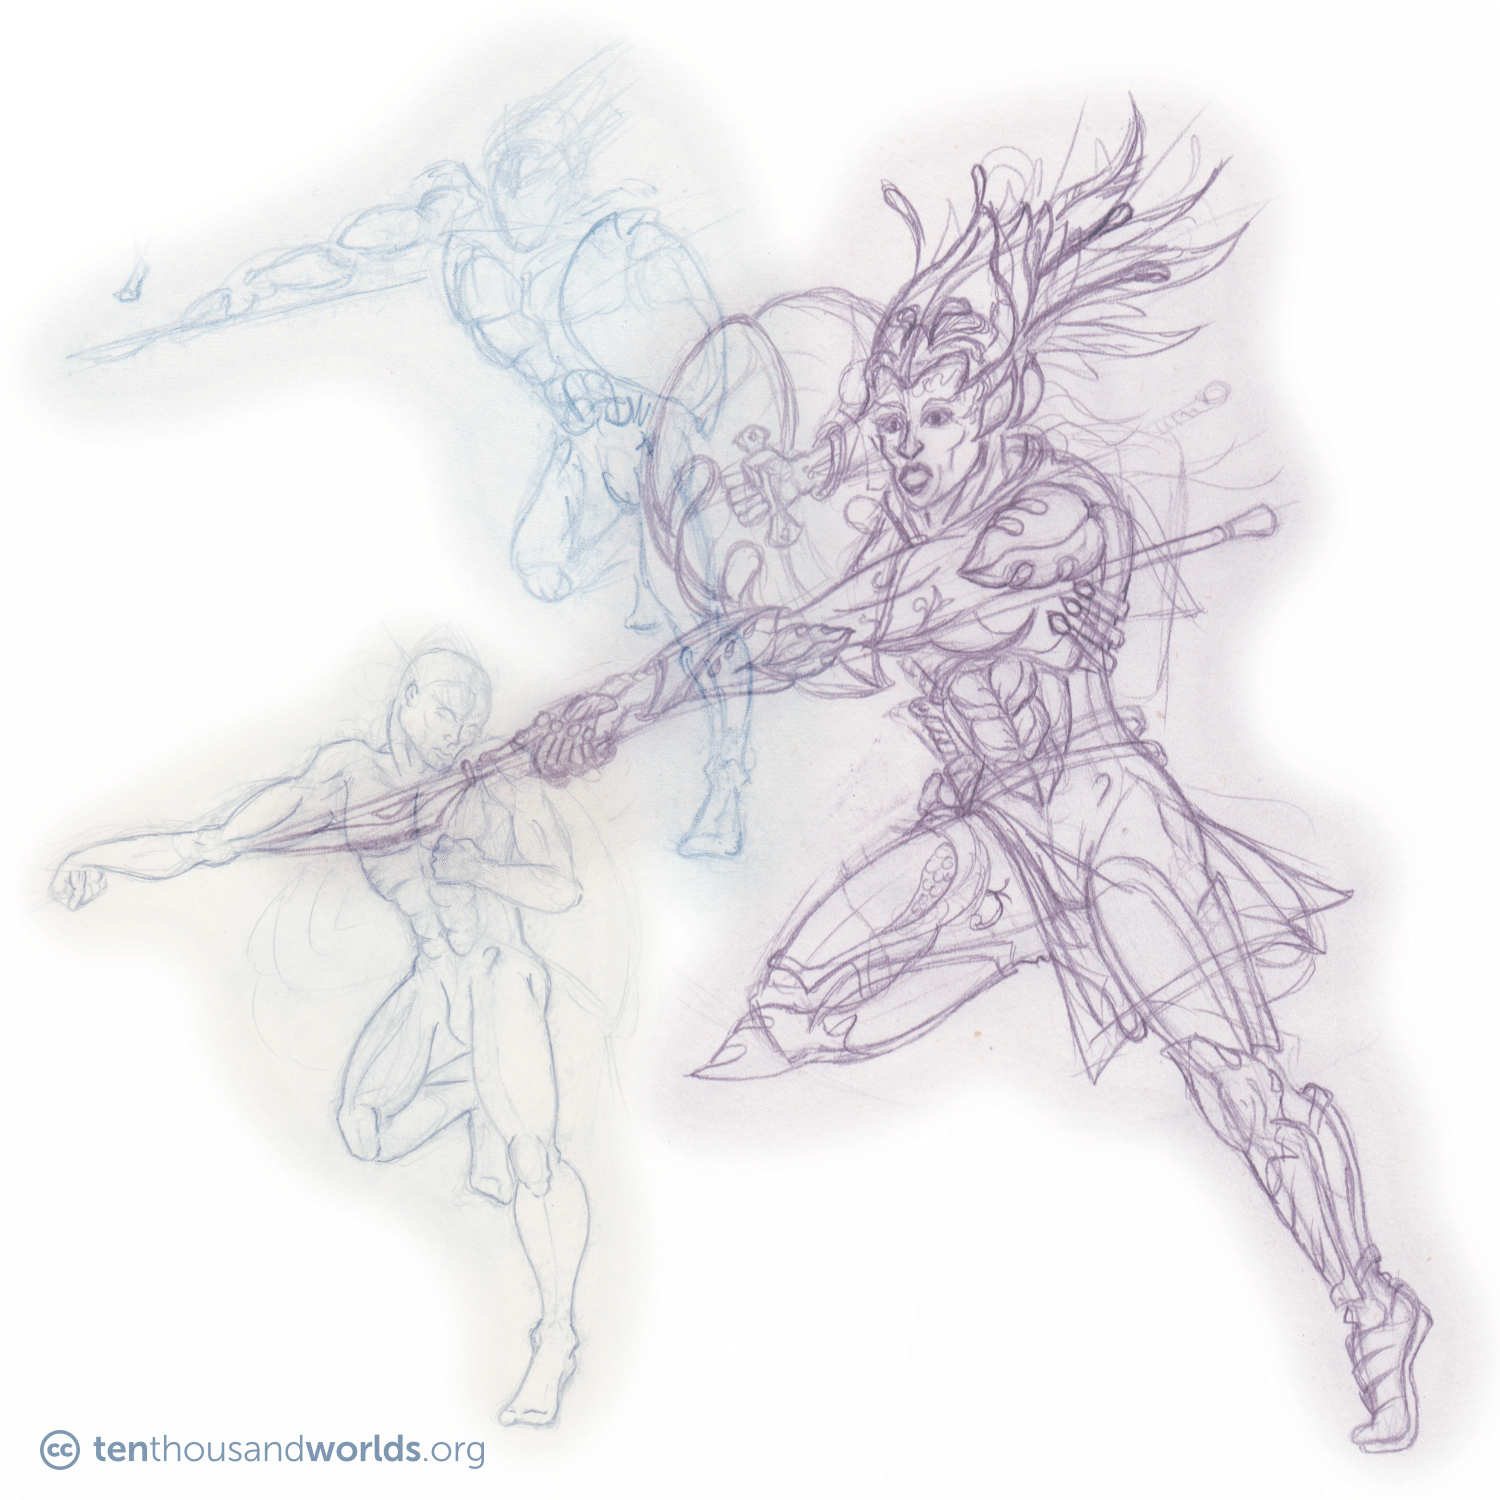 Multiple overlapping alternate pencil sketches of a charging warrior holding a spear and shield.